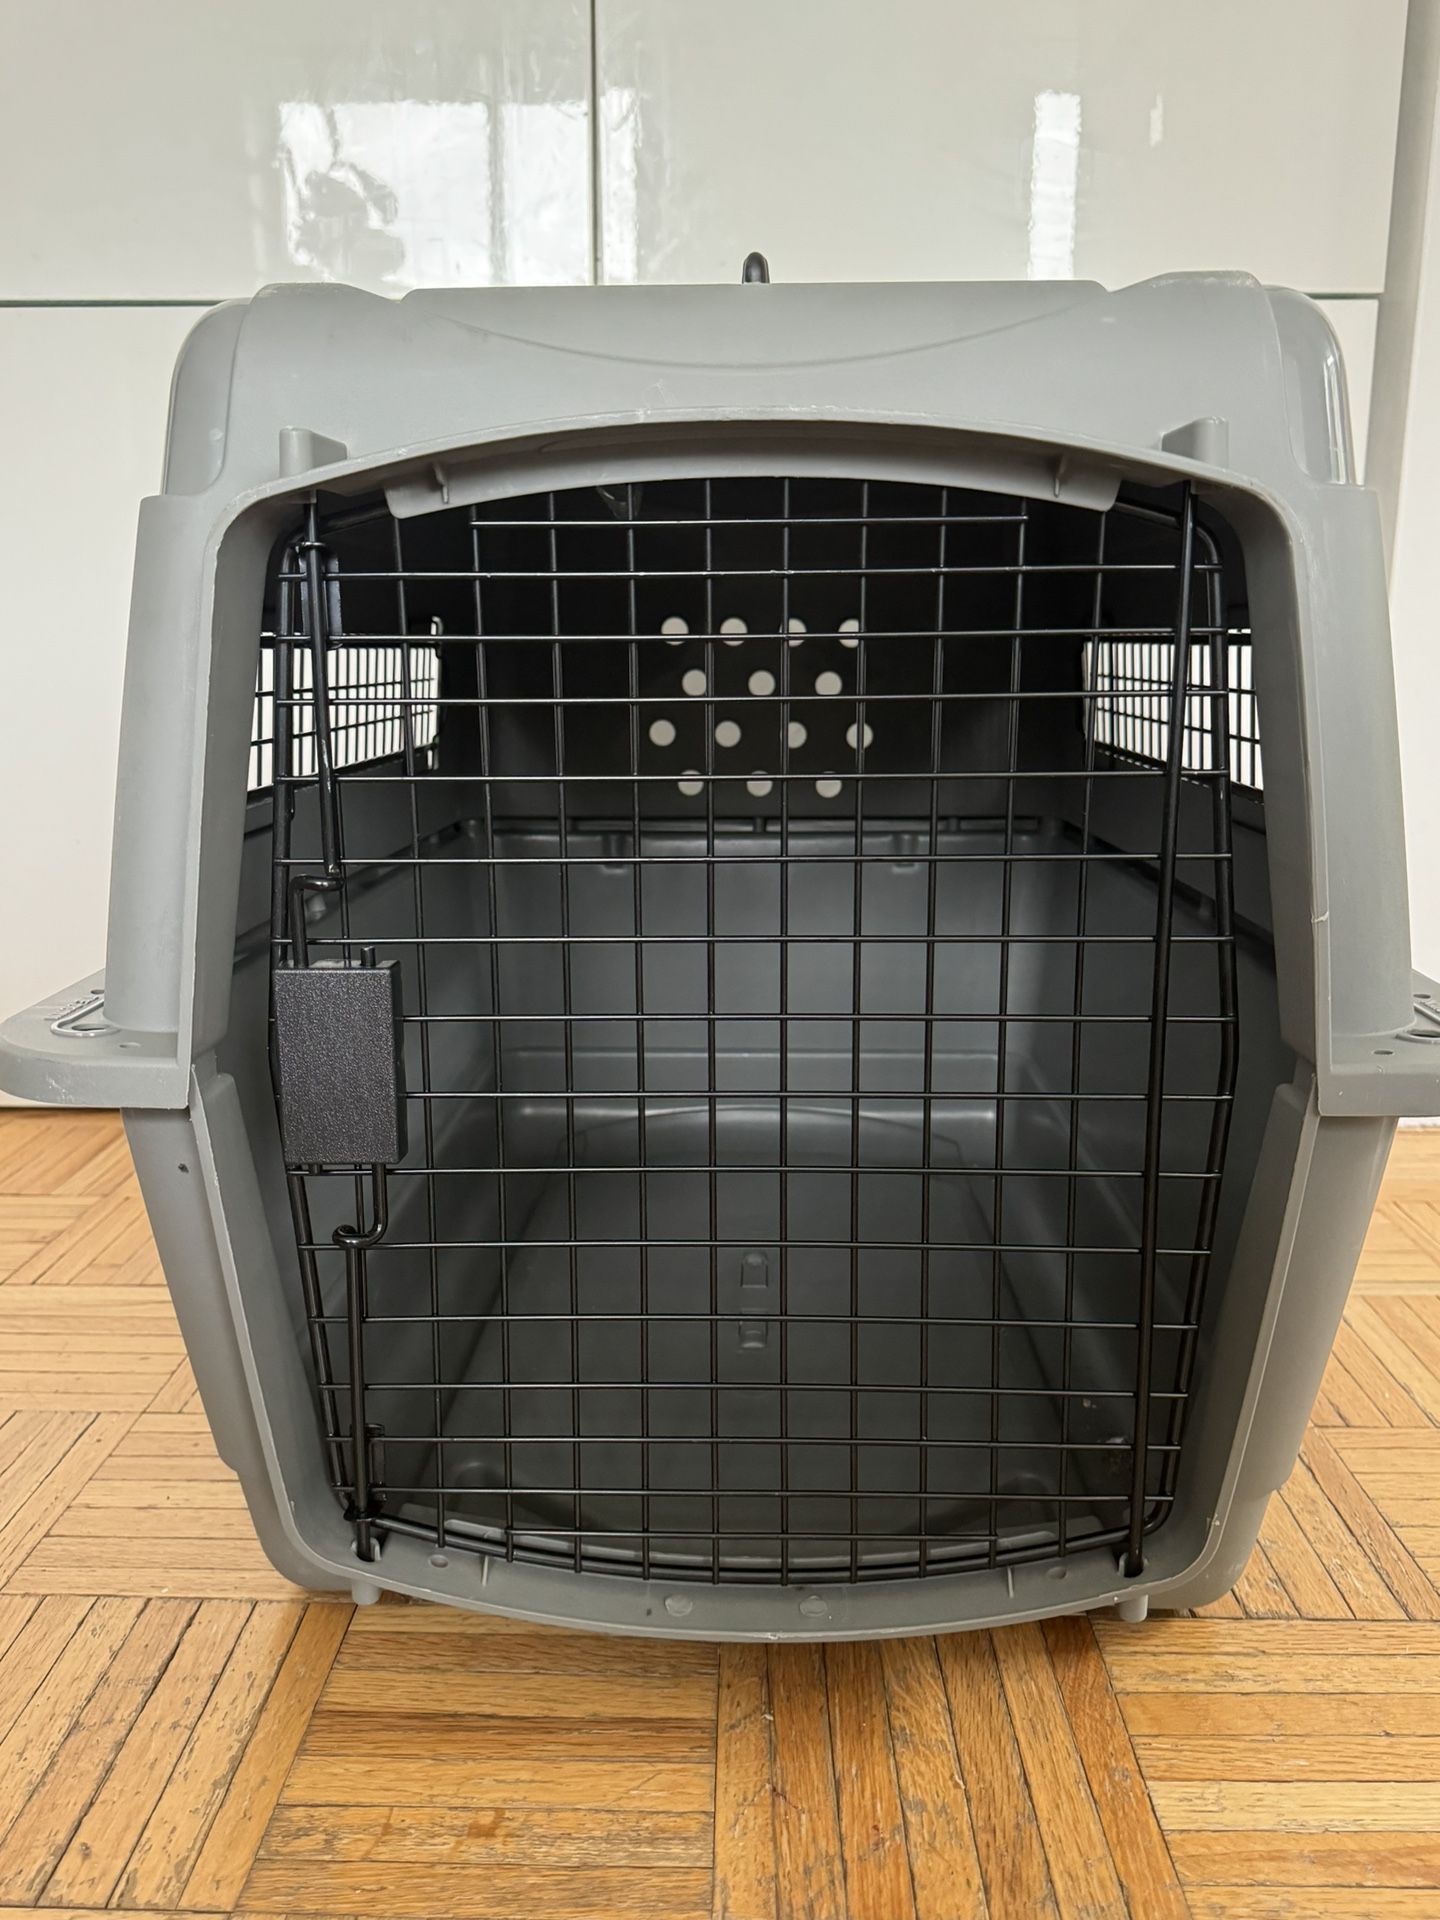 Petmate Sky Kennel - New 